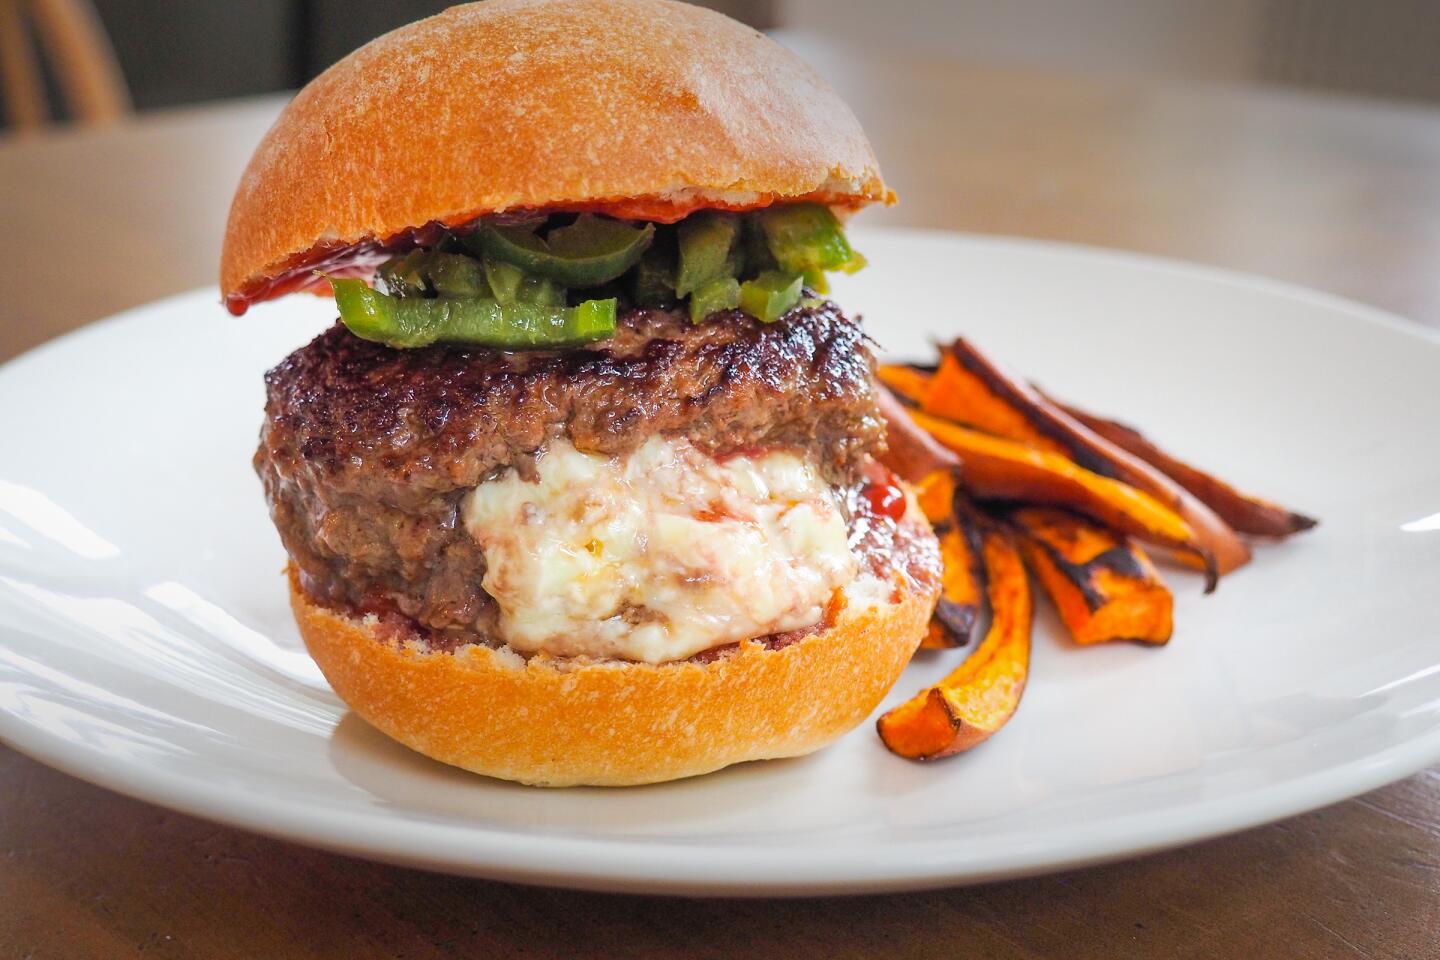 The EveryPlate jalapeno popper-stuffed burger with sweet potato fries.